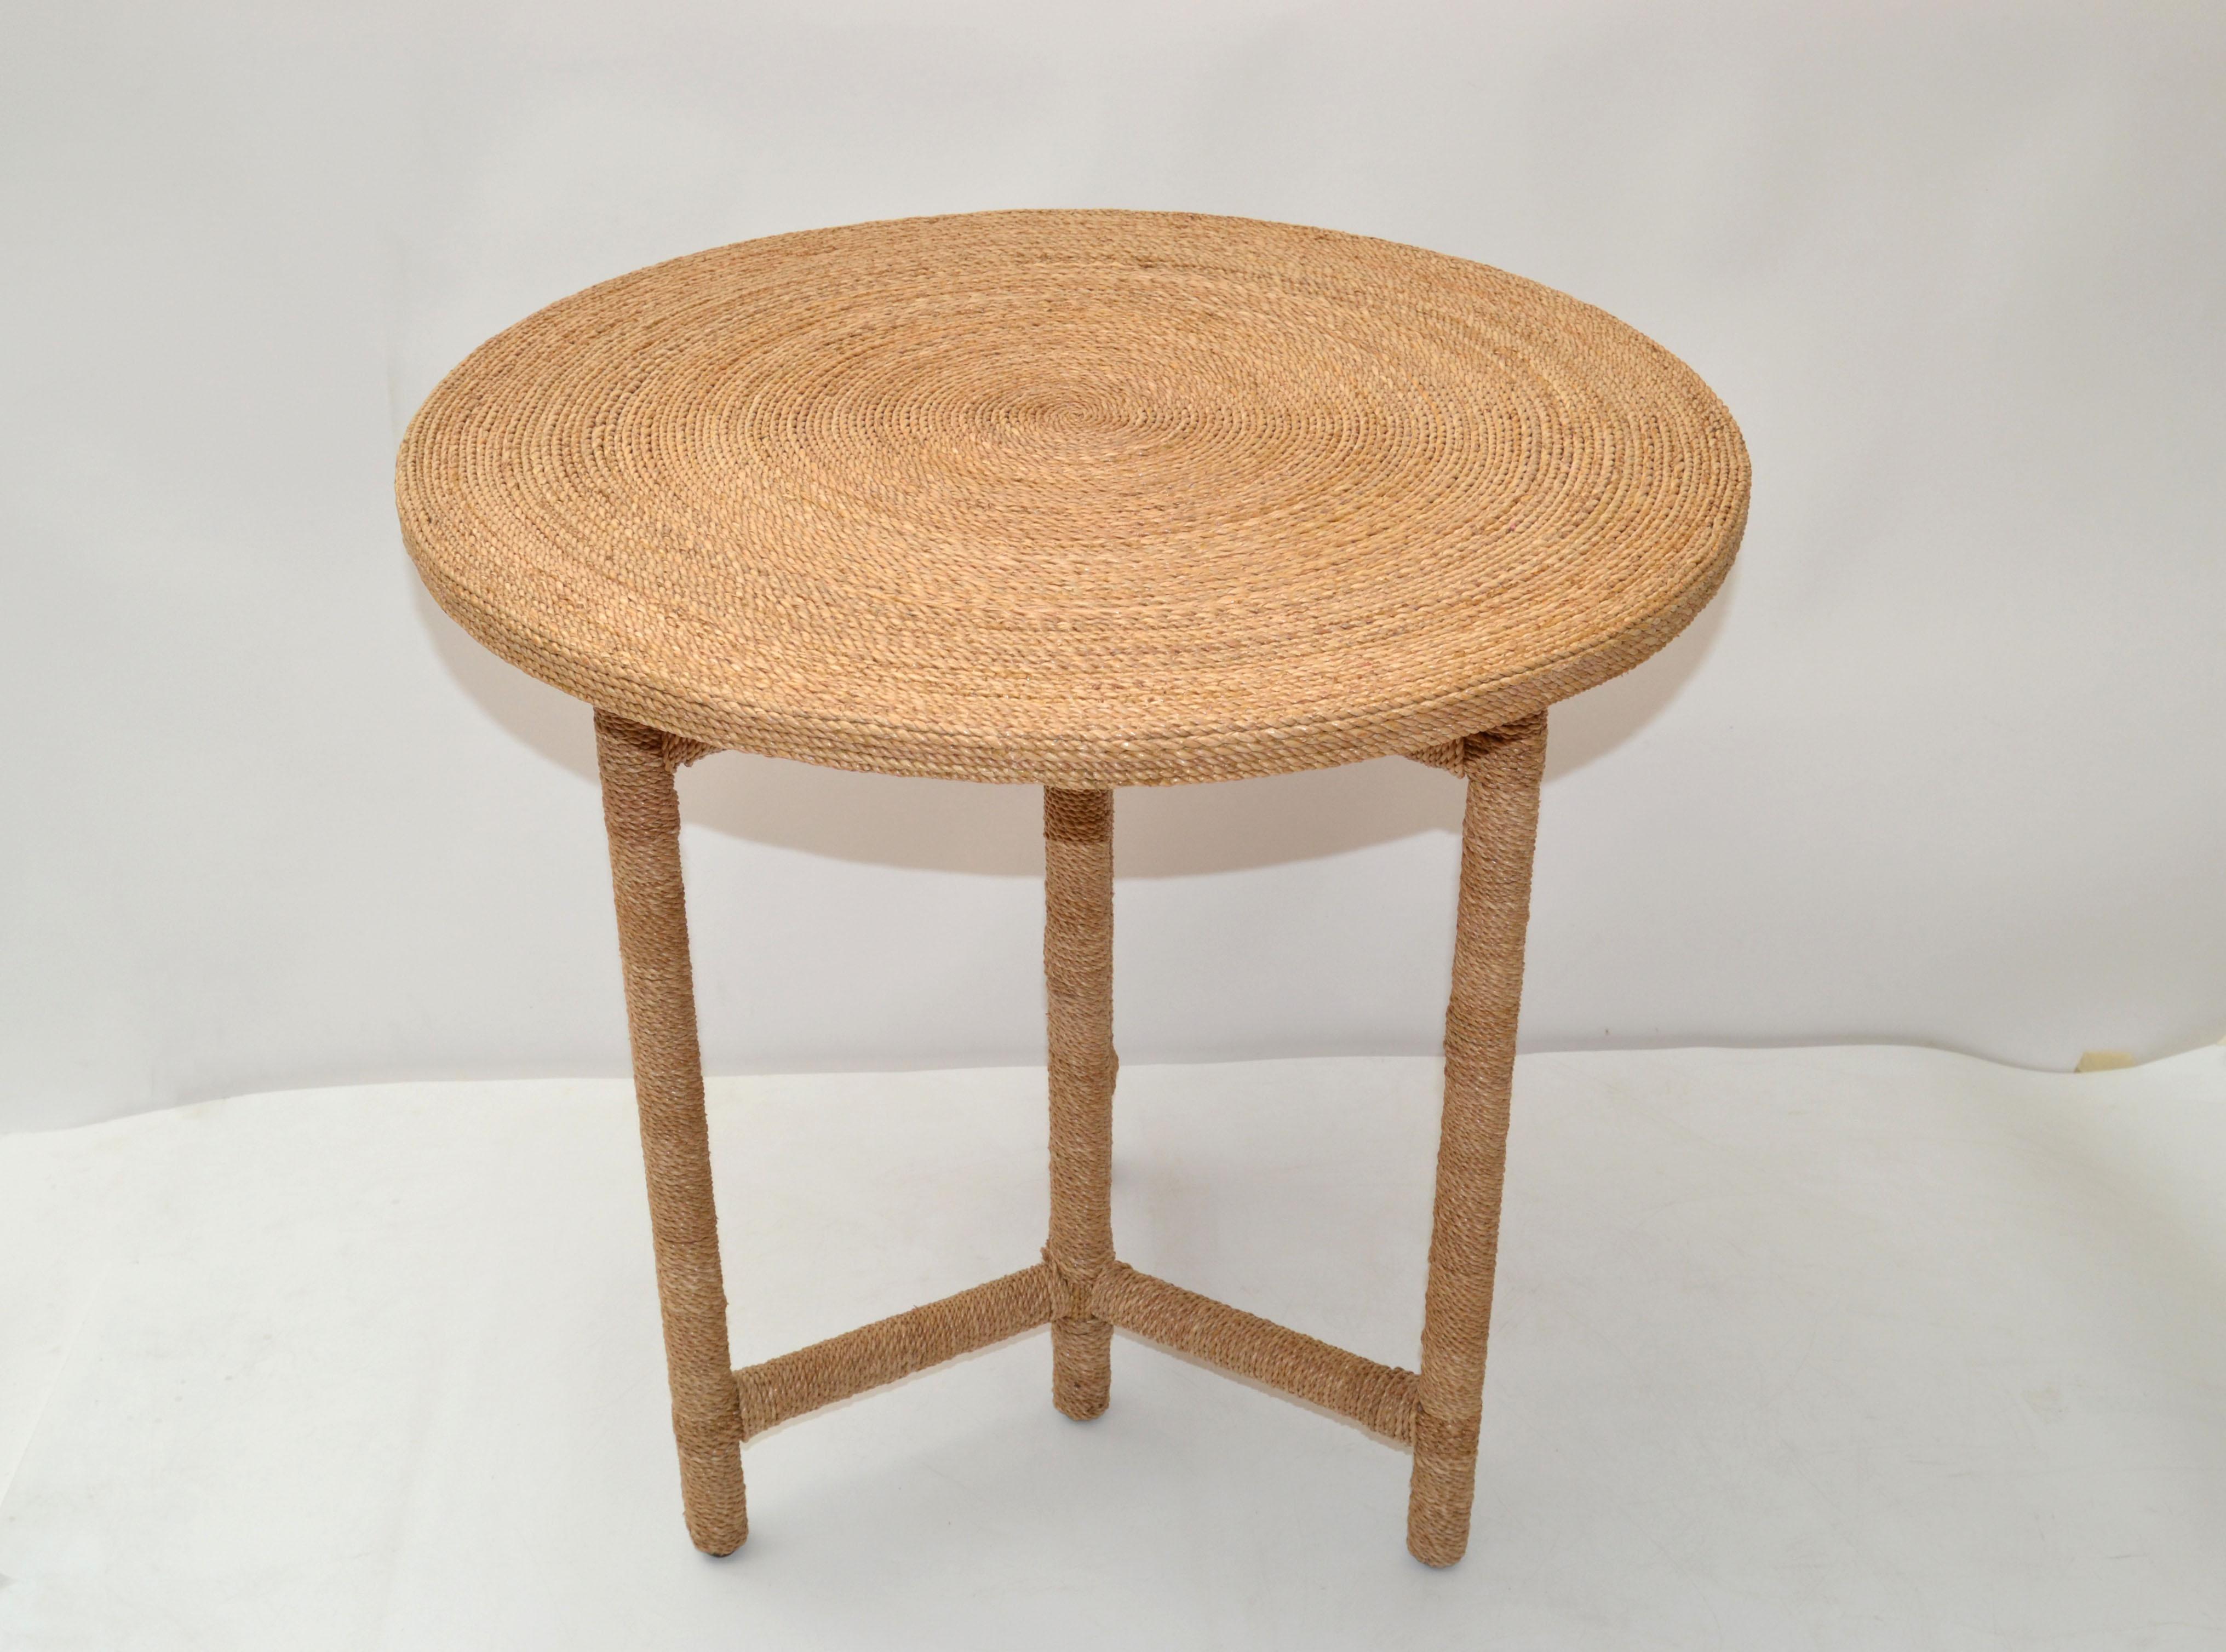 Modern Mario Lopez Torres style rope coffee table or center table with geometric shaped base made for Palecek Philippines.
Marked with foil label underneath.